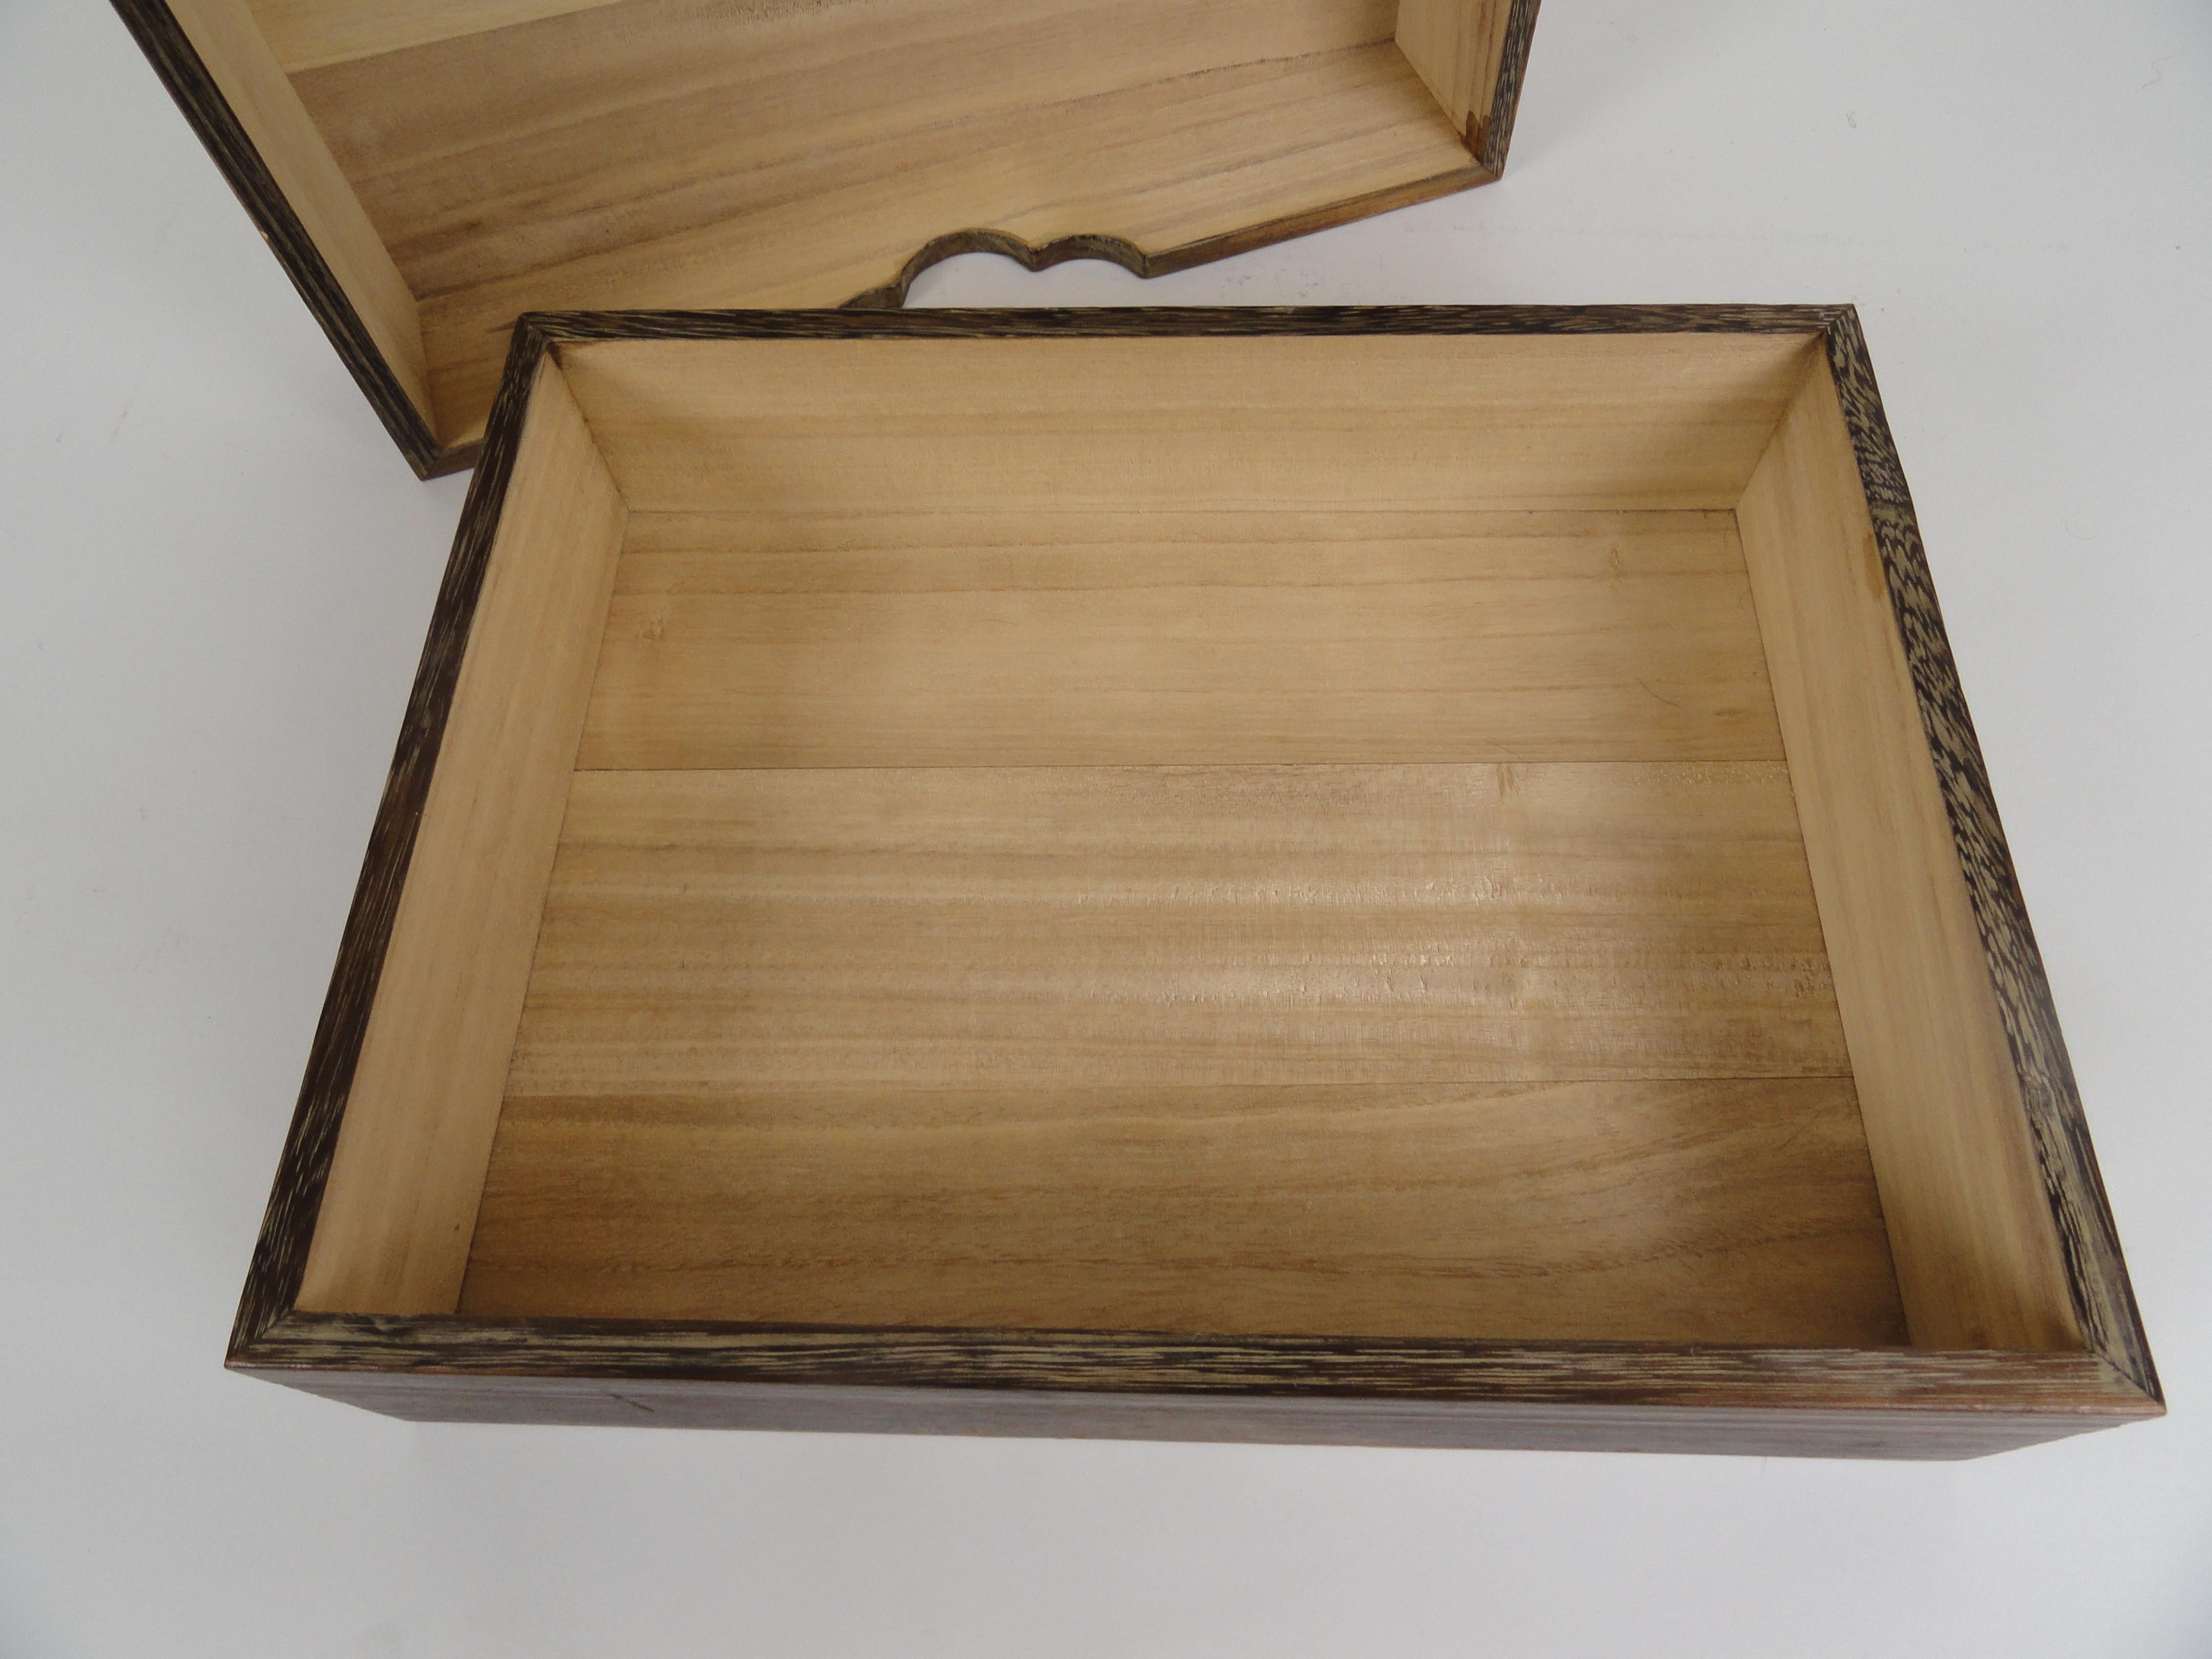 Late 20th Century Japanese Wood Box For Sale